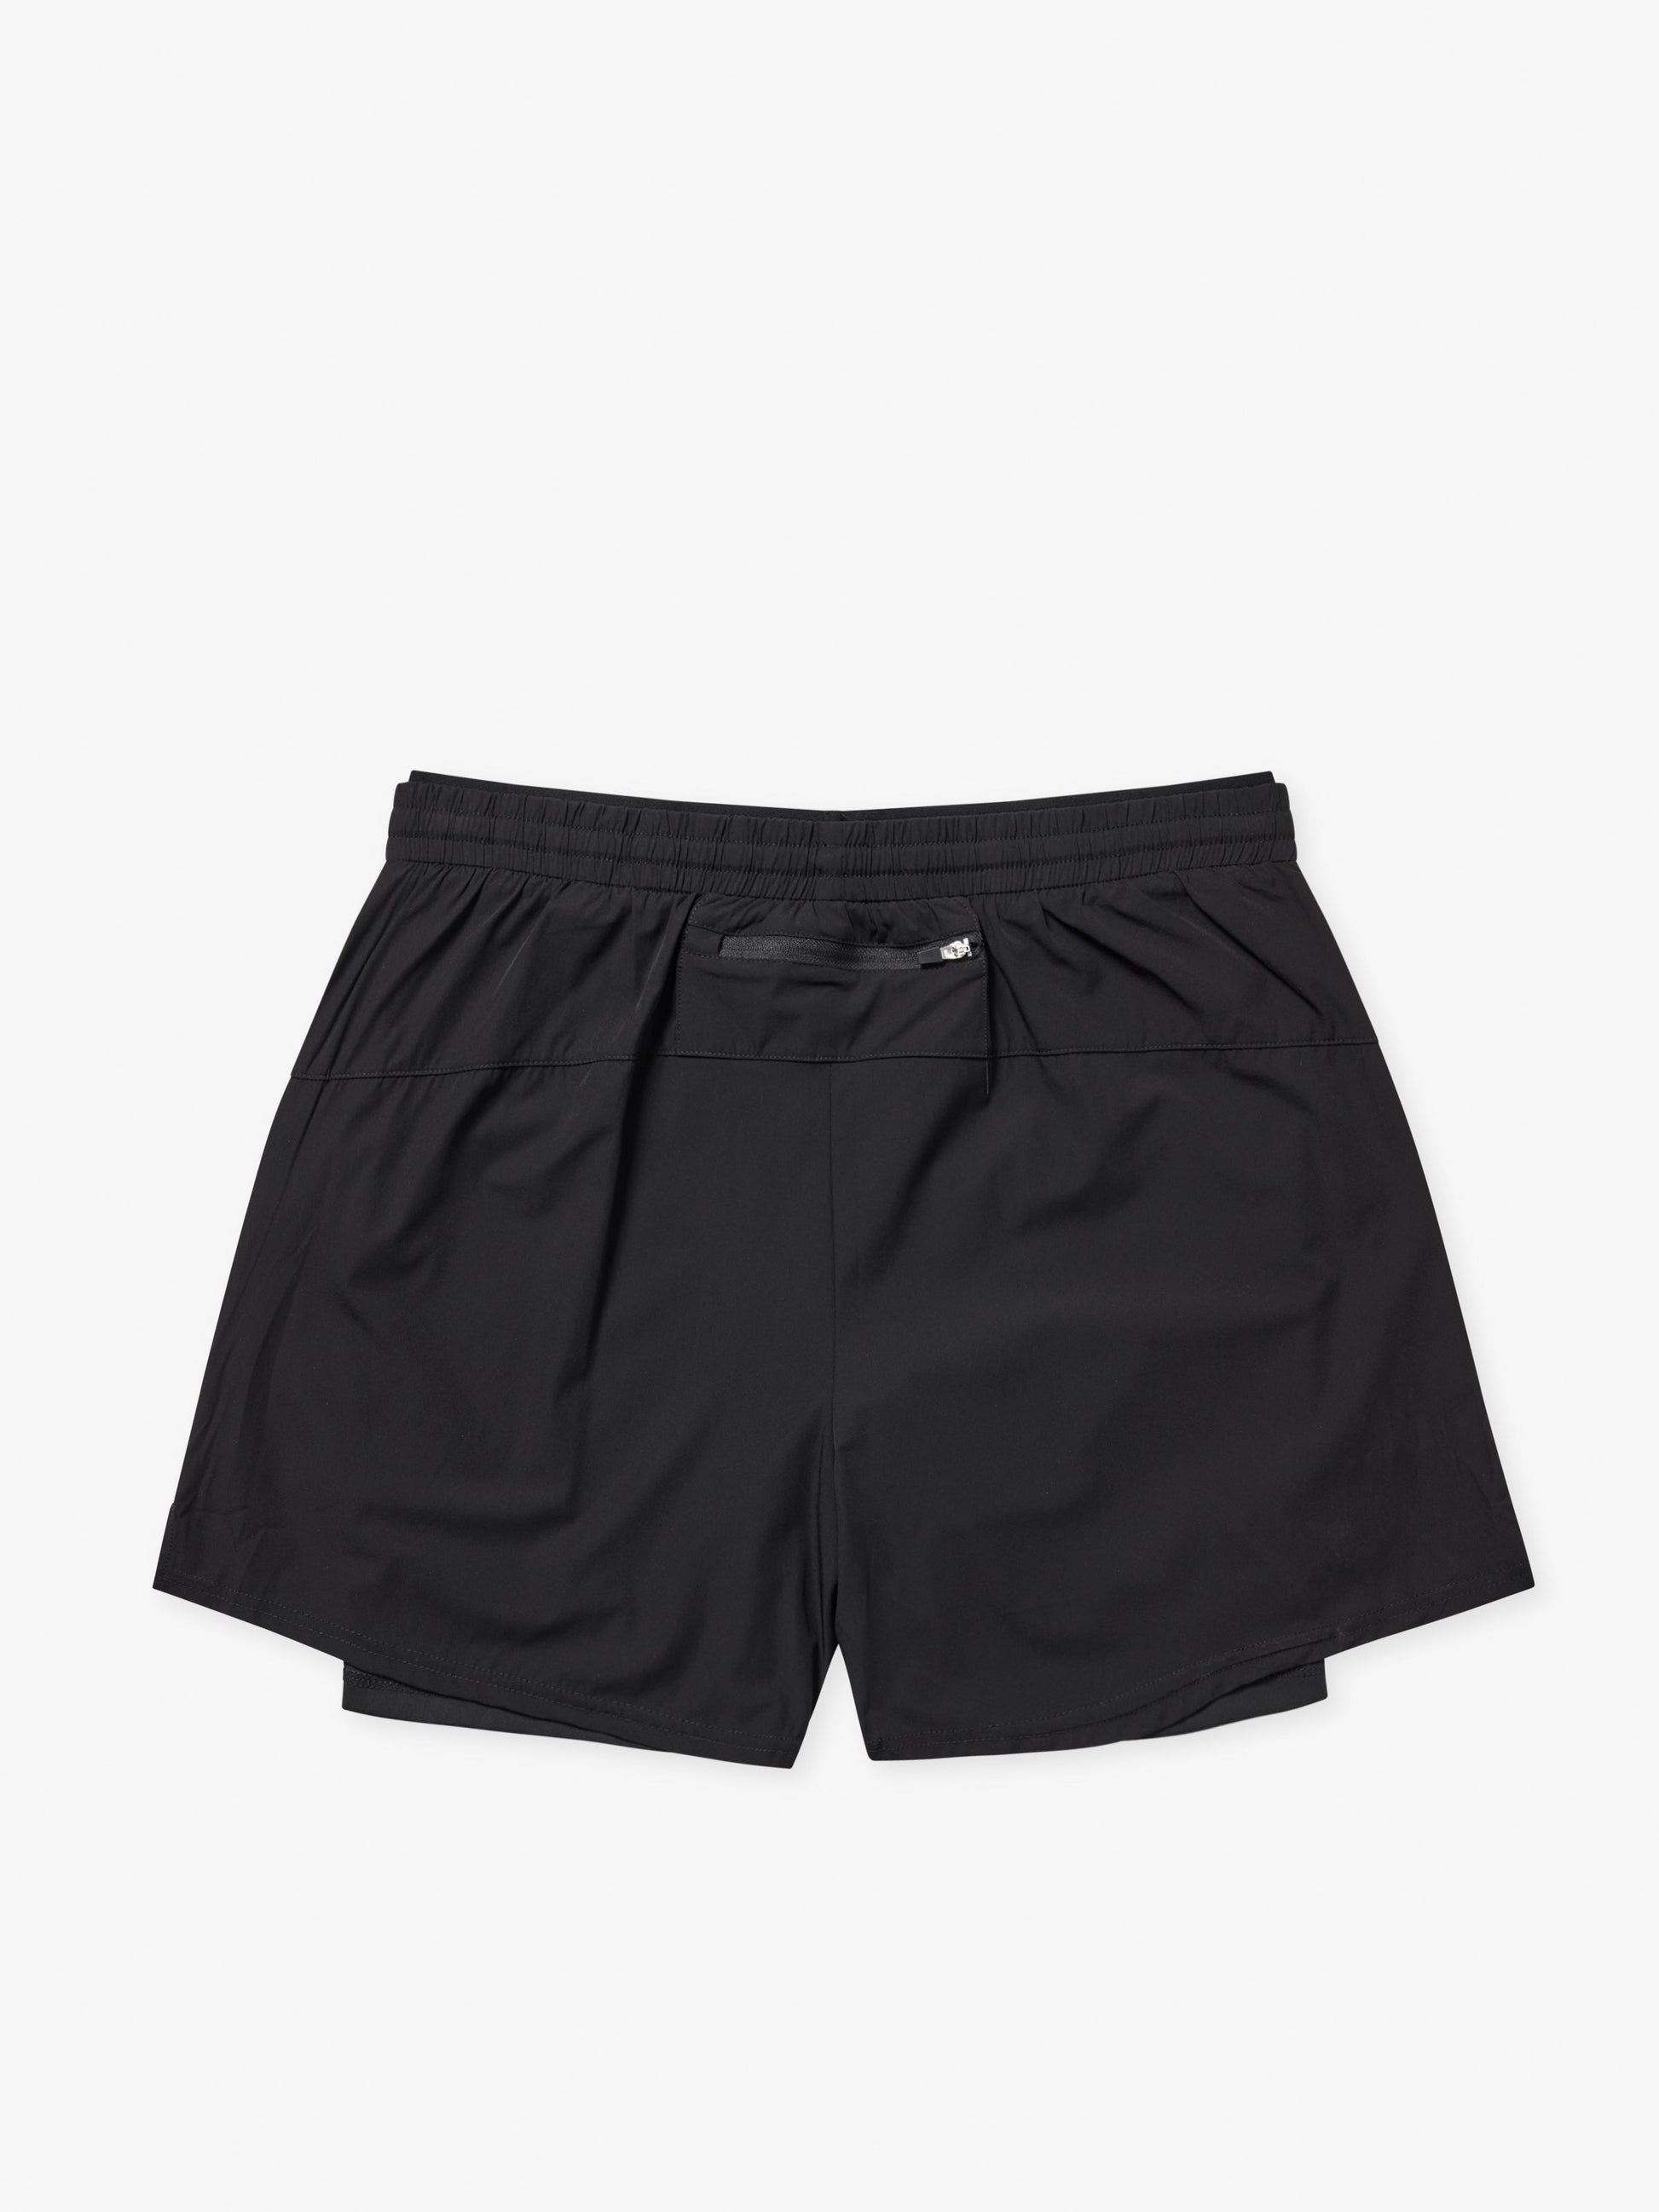 7 DAYS Two-in-One Shorts Shorts 001 Black